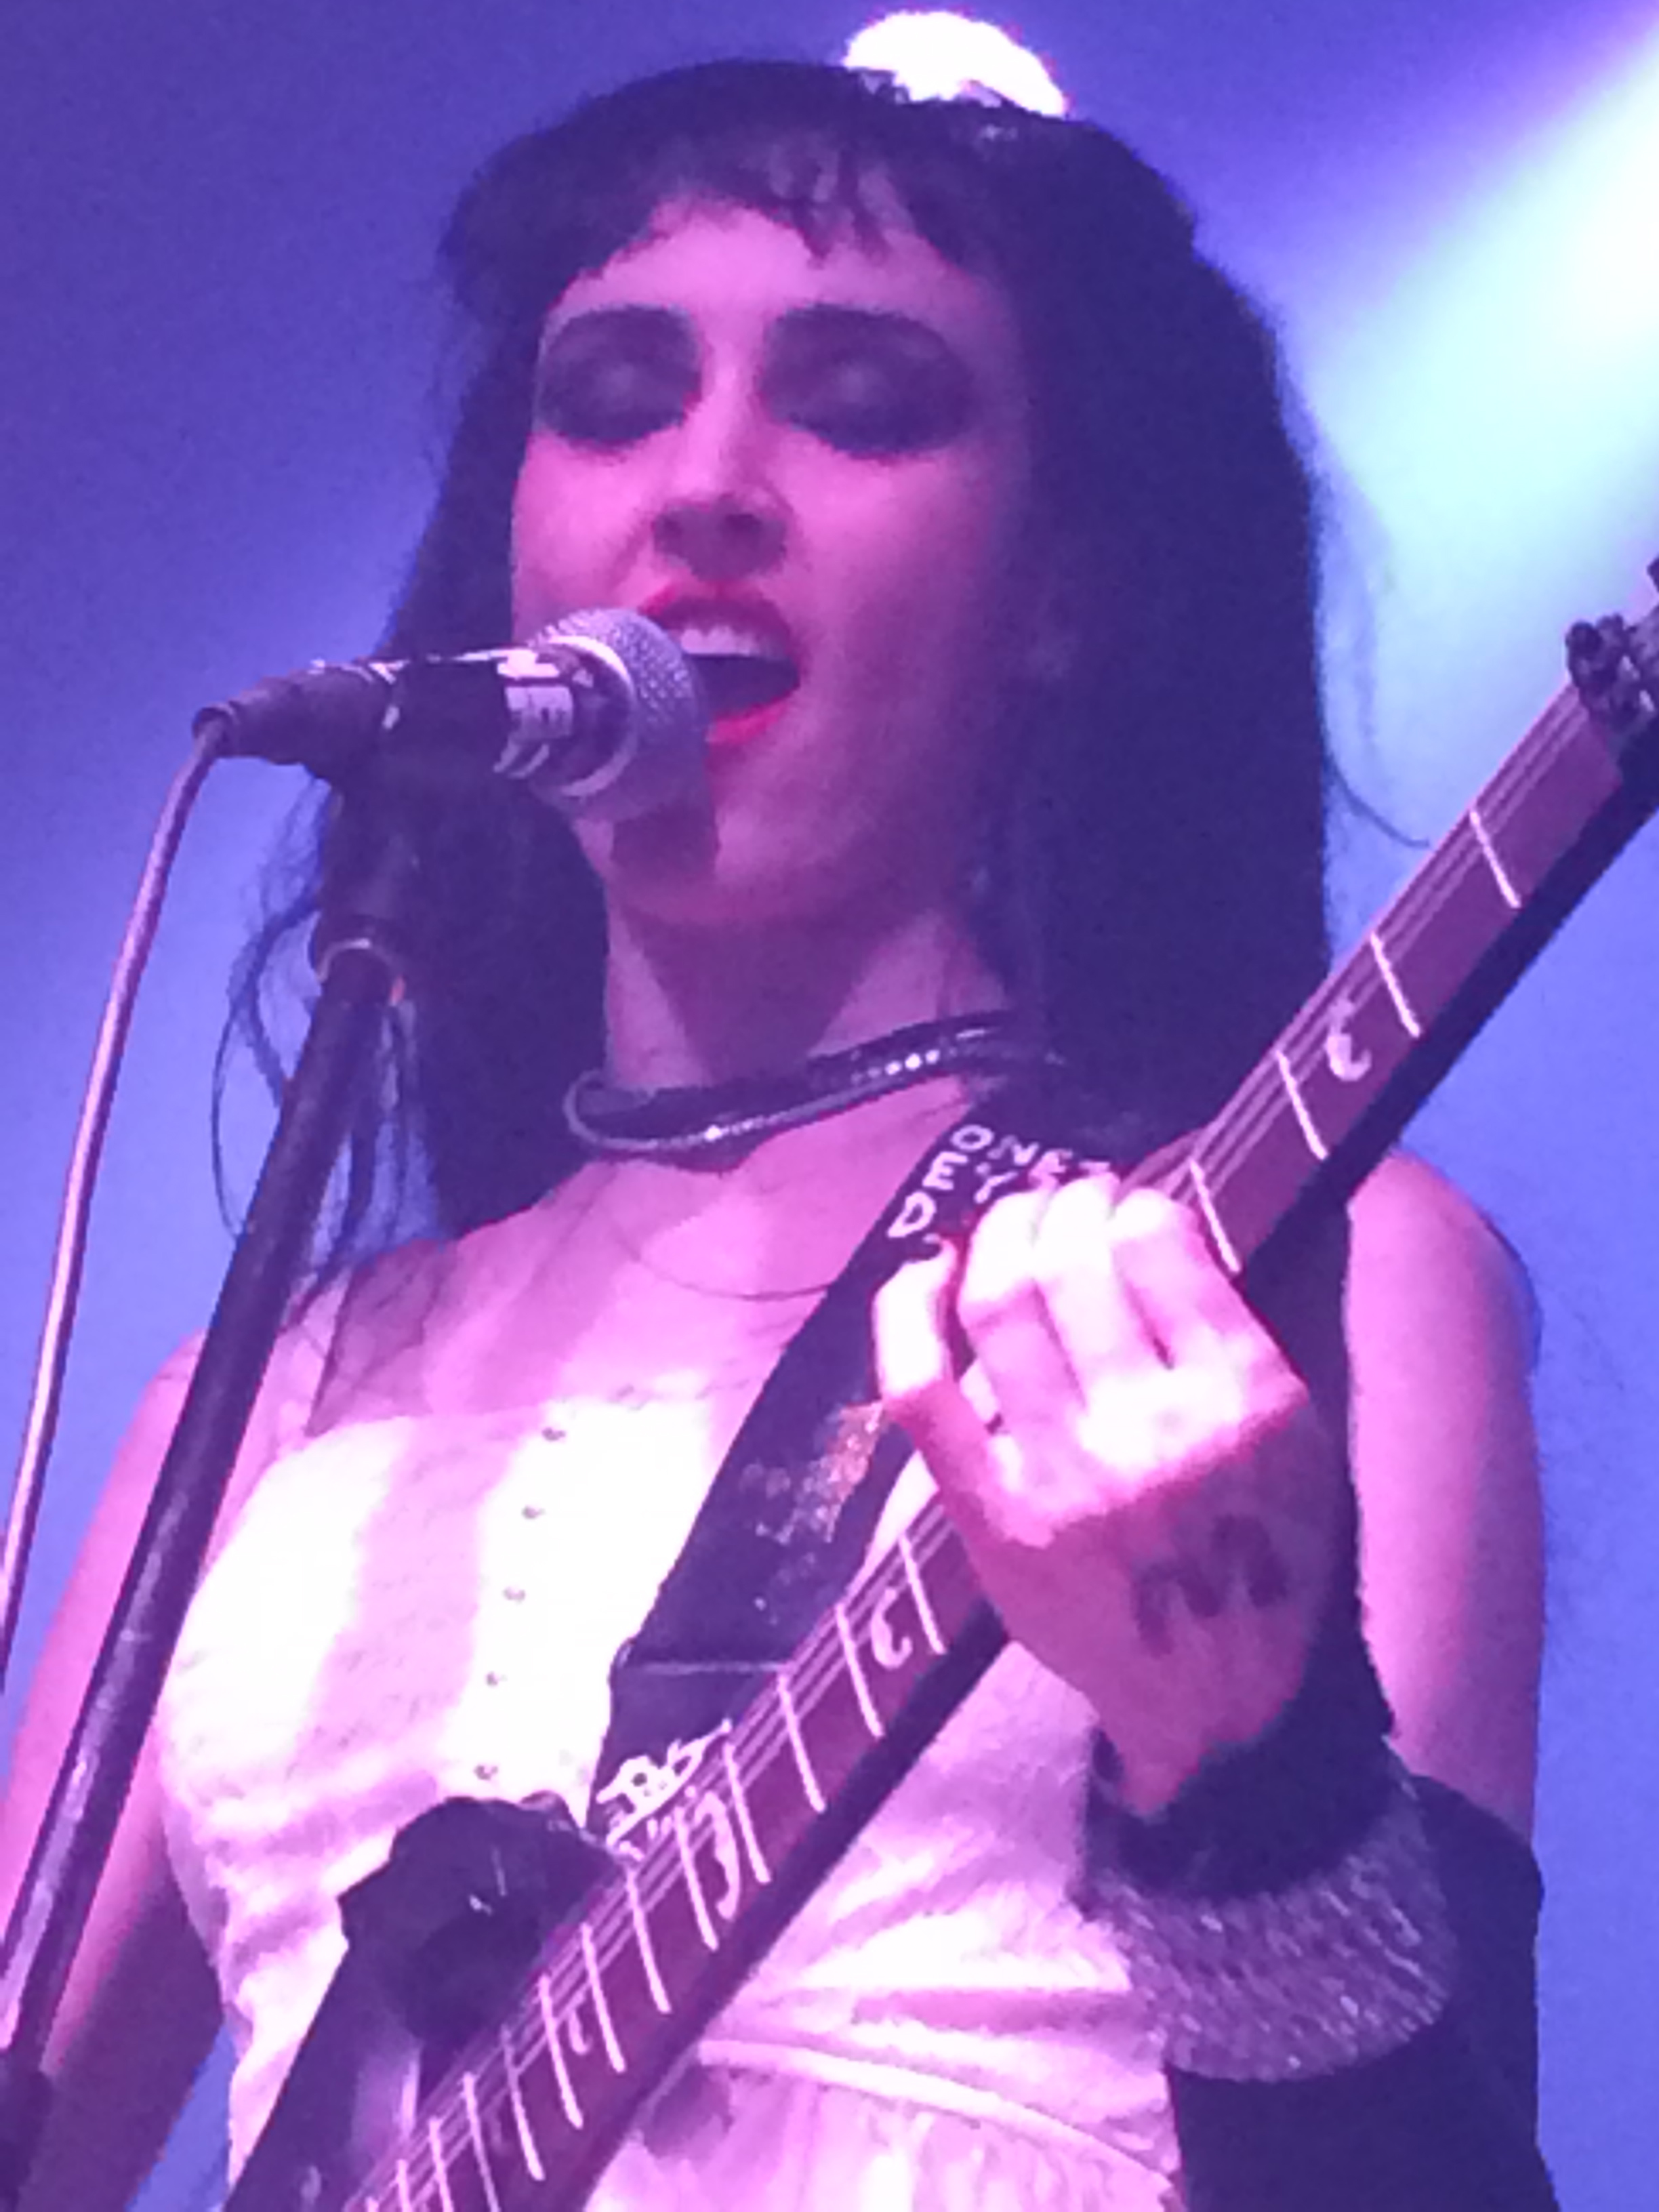 Live shot of Kimberly Freeman of One Eyed Doll at Club Red 4/24/15